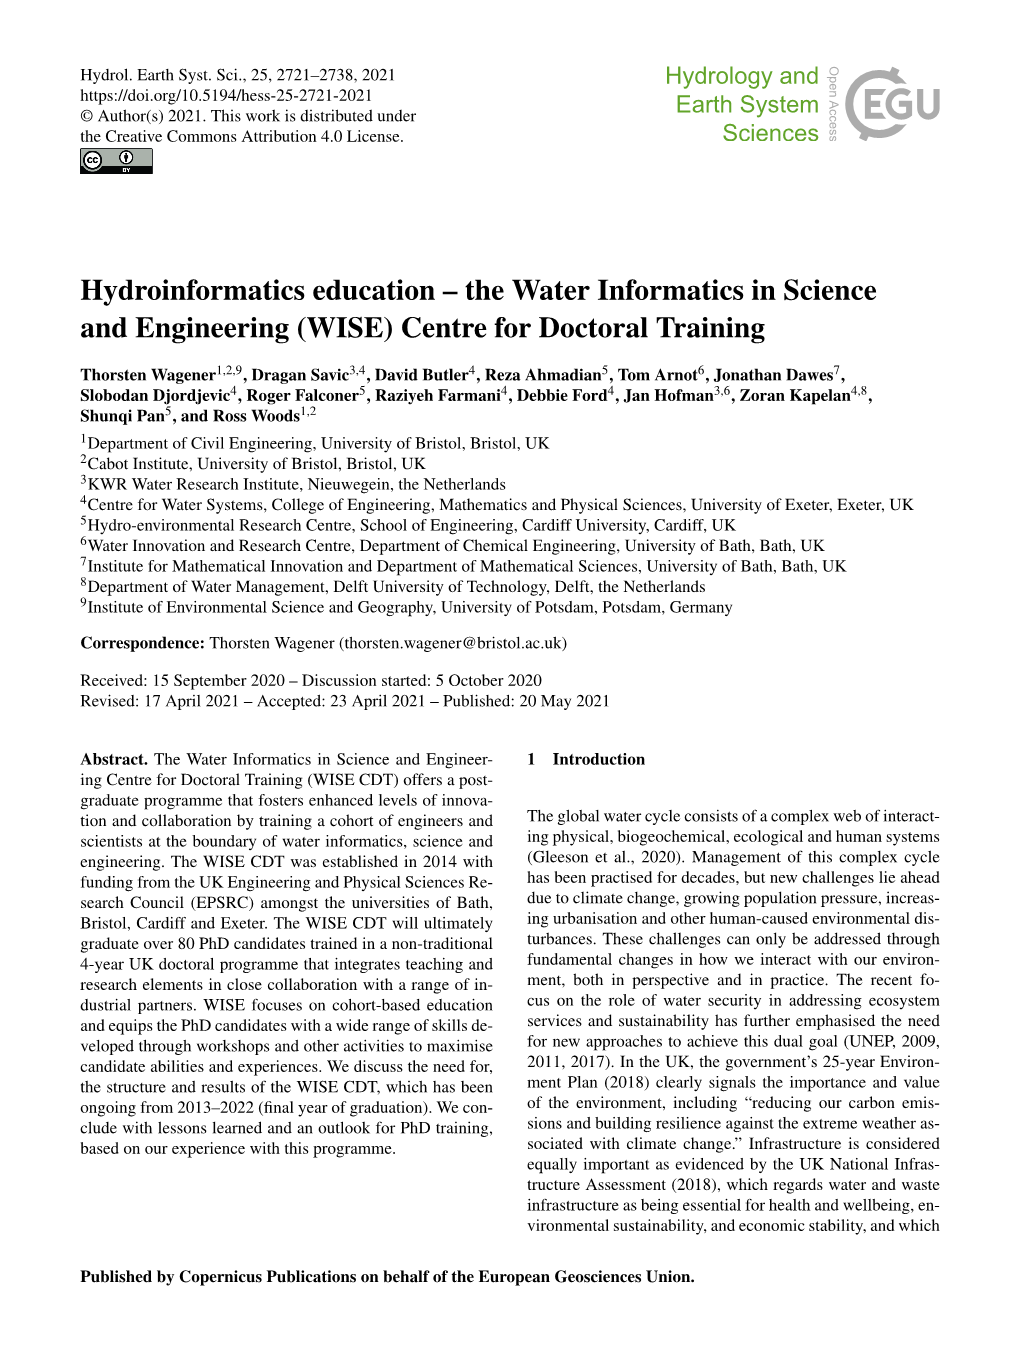 The Water Informatics in Science and Engineering (WISE) Centre for Doctoral Training